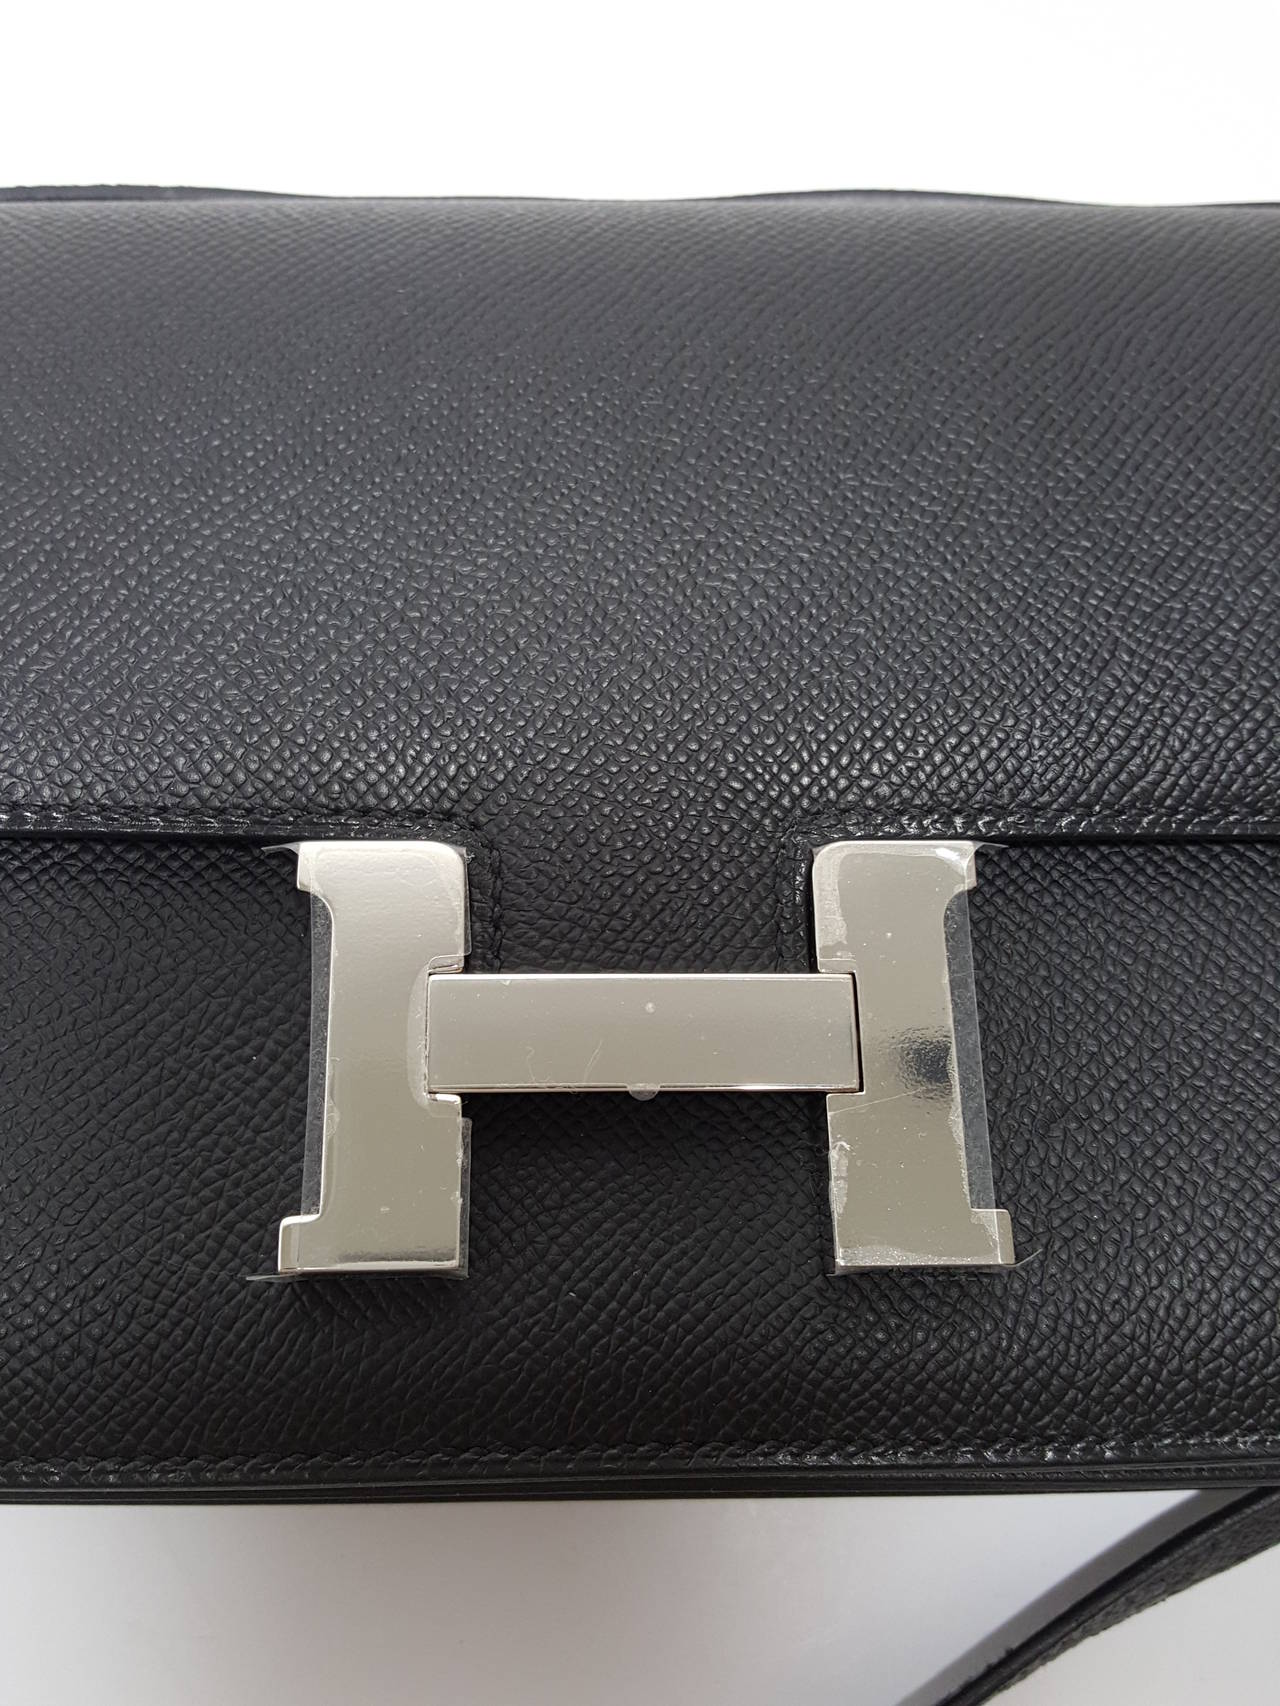 Here is a lovely HERMES Constance Elan 25 cm in black Epsom leather with palladium hardware.  Never used.  Plastic is still on the hardware.
The lovely and durable Epson Leather is less likely to show wear and scratches.  This piece will arrive to